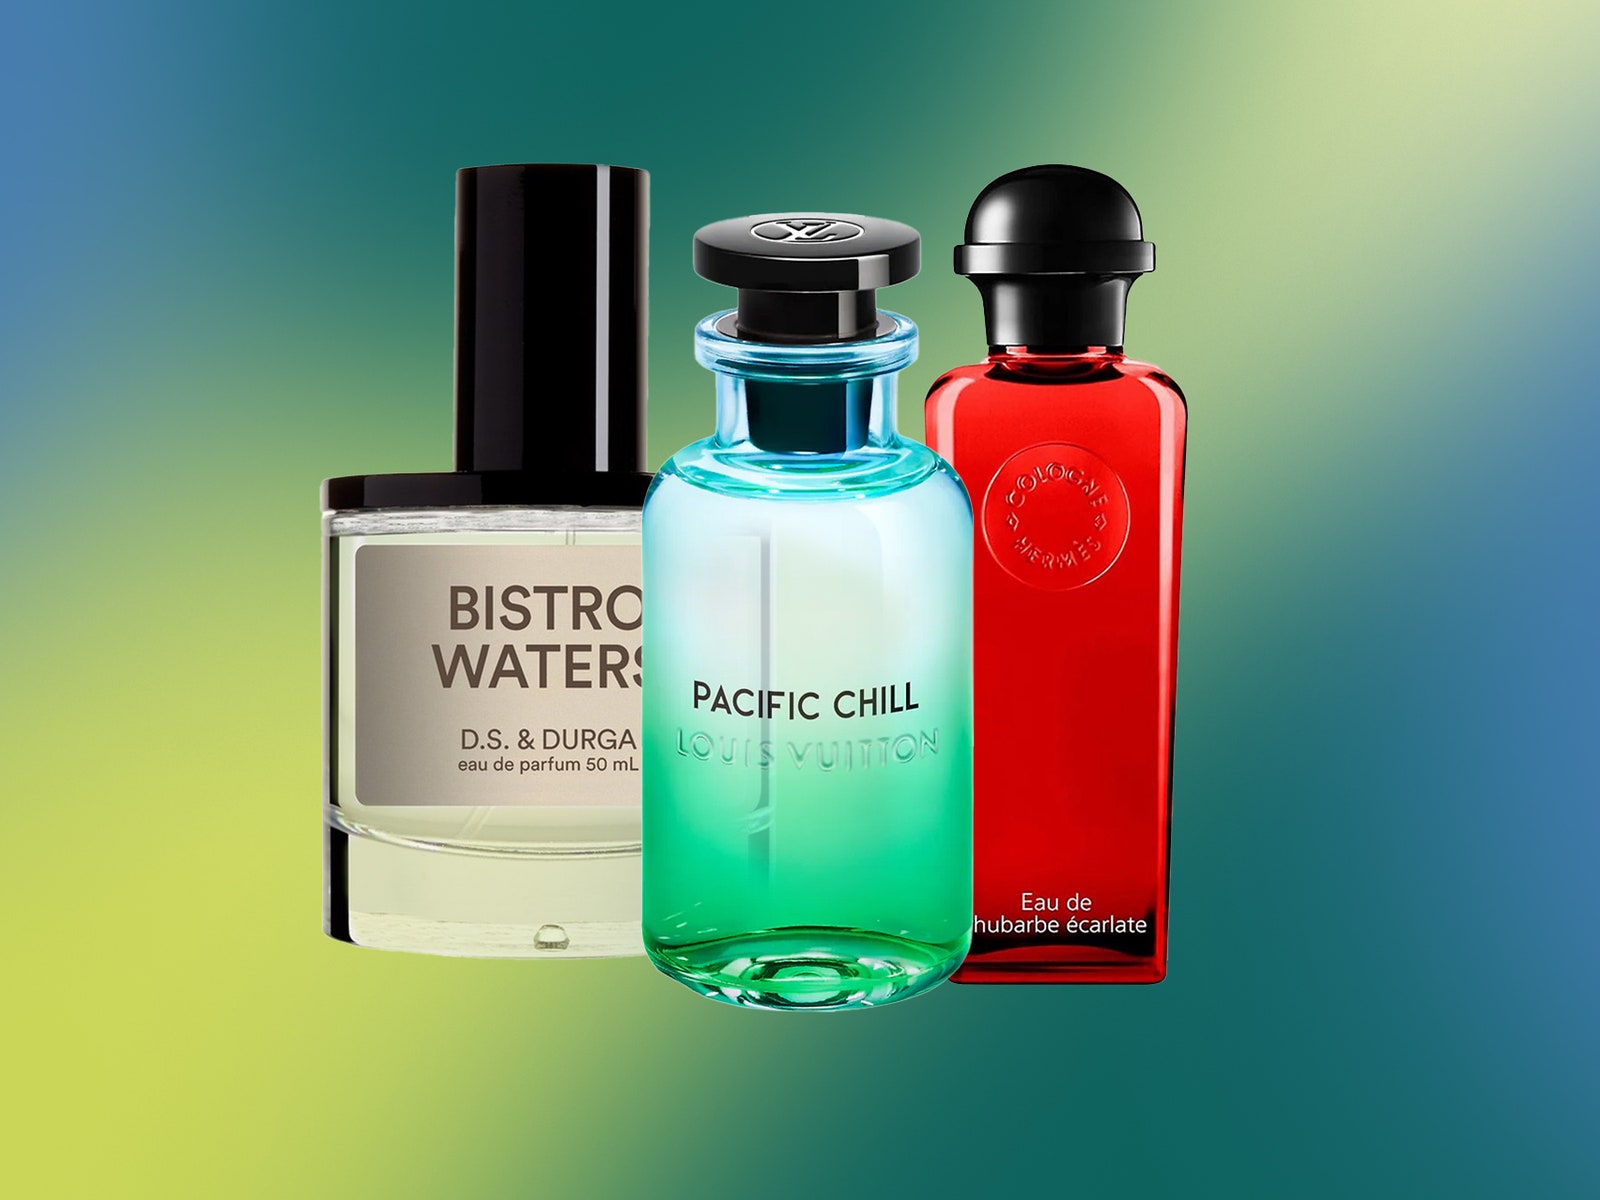 Perfumes with vegetable scents are trending, so do we all want to smell like carrots now?